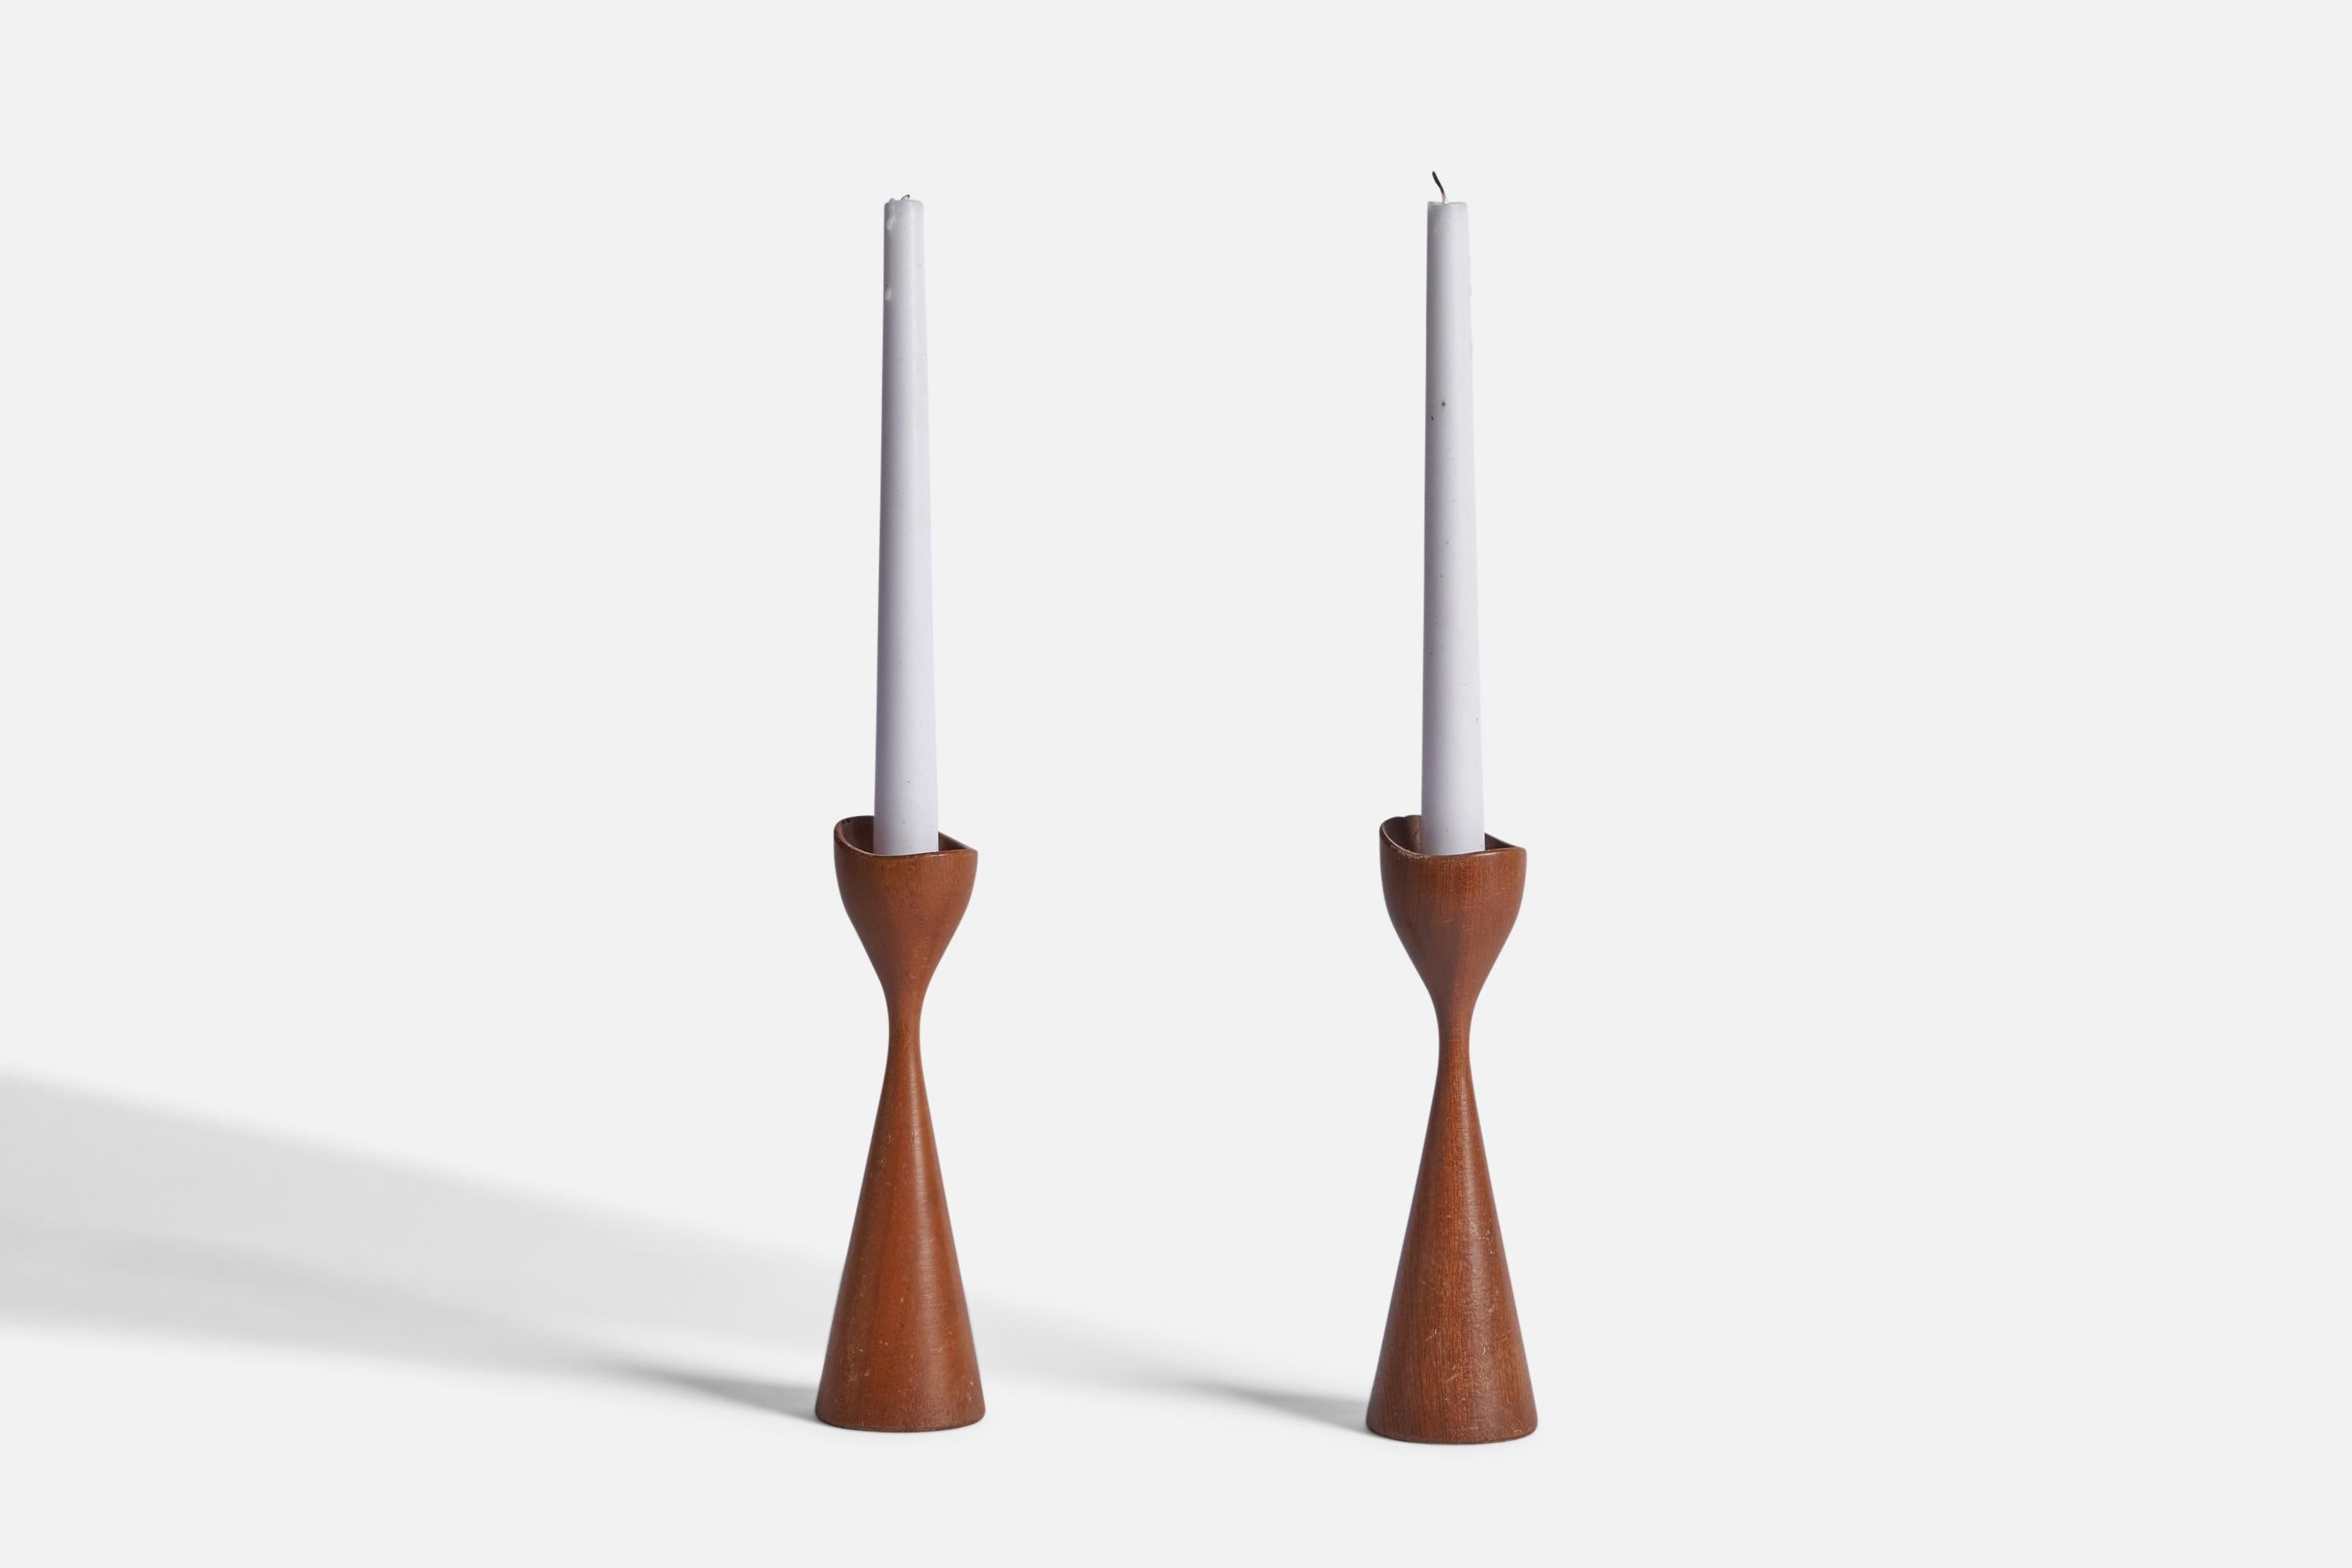 A pair of teak candlesticks designed and produced in Sweden, 1950s.

Candle Diameter (inches): 0.75”